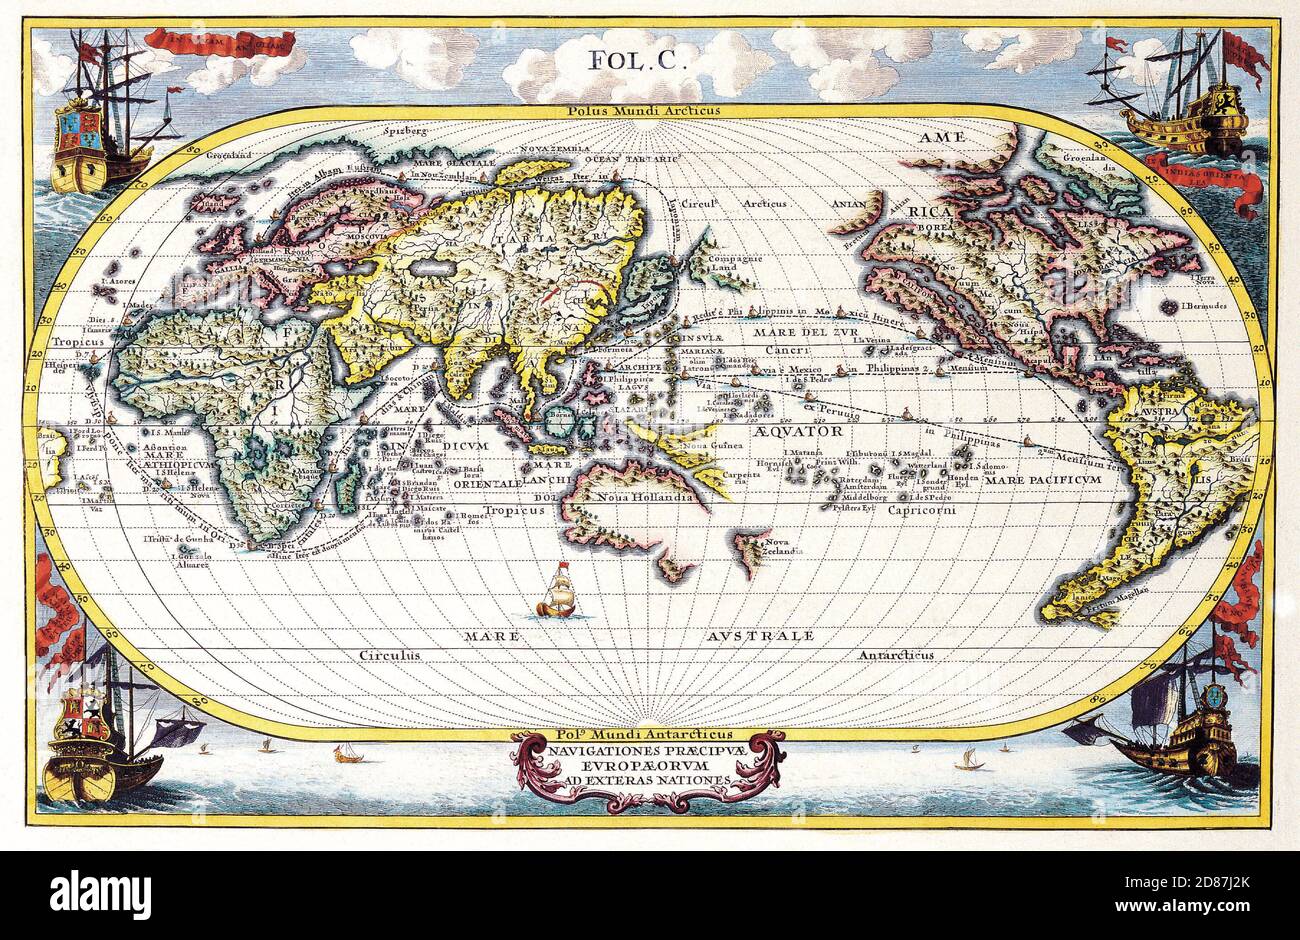 Illustrated old map of the World, vintage style full of details Stock Photo